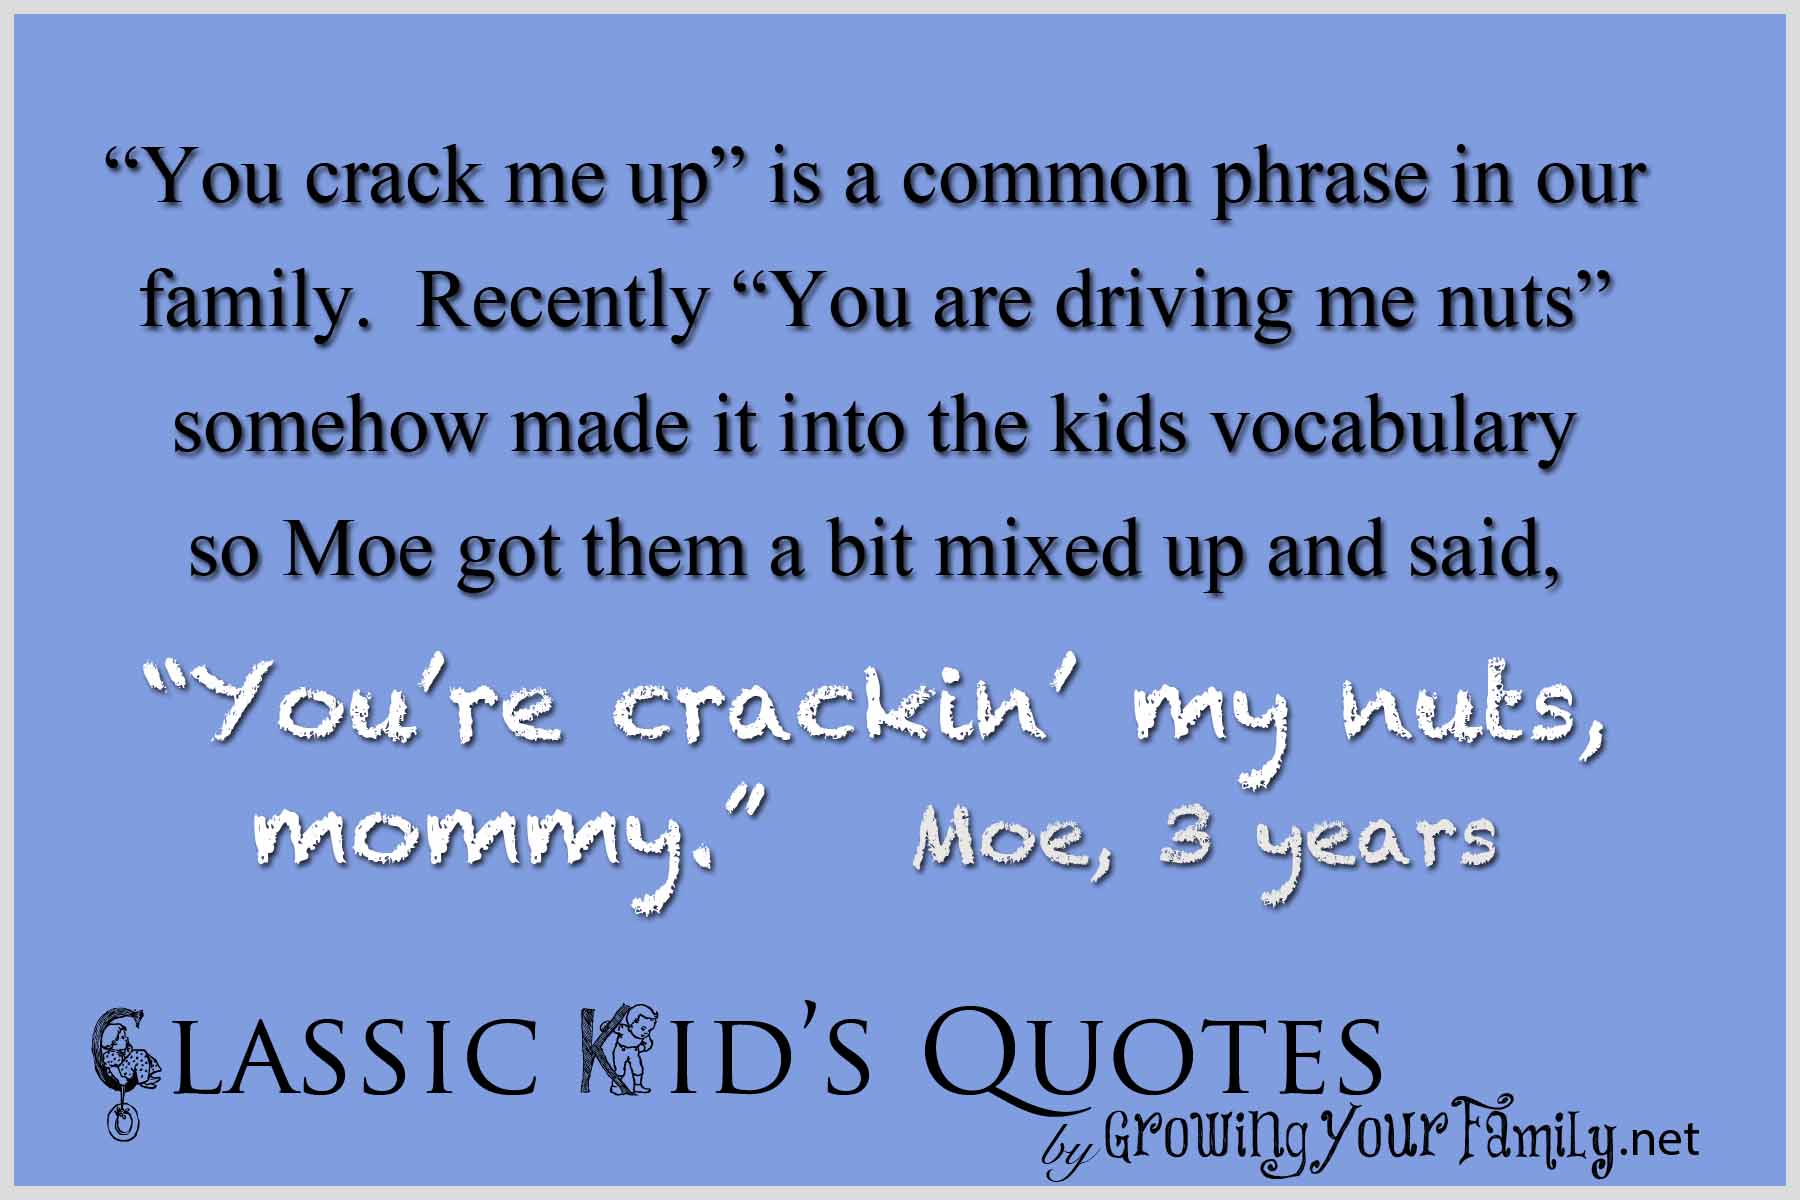 Kids quote #6